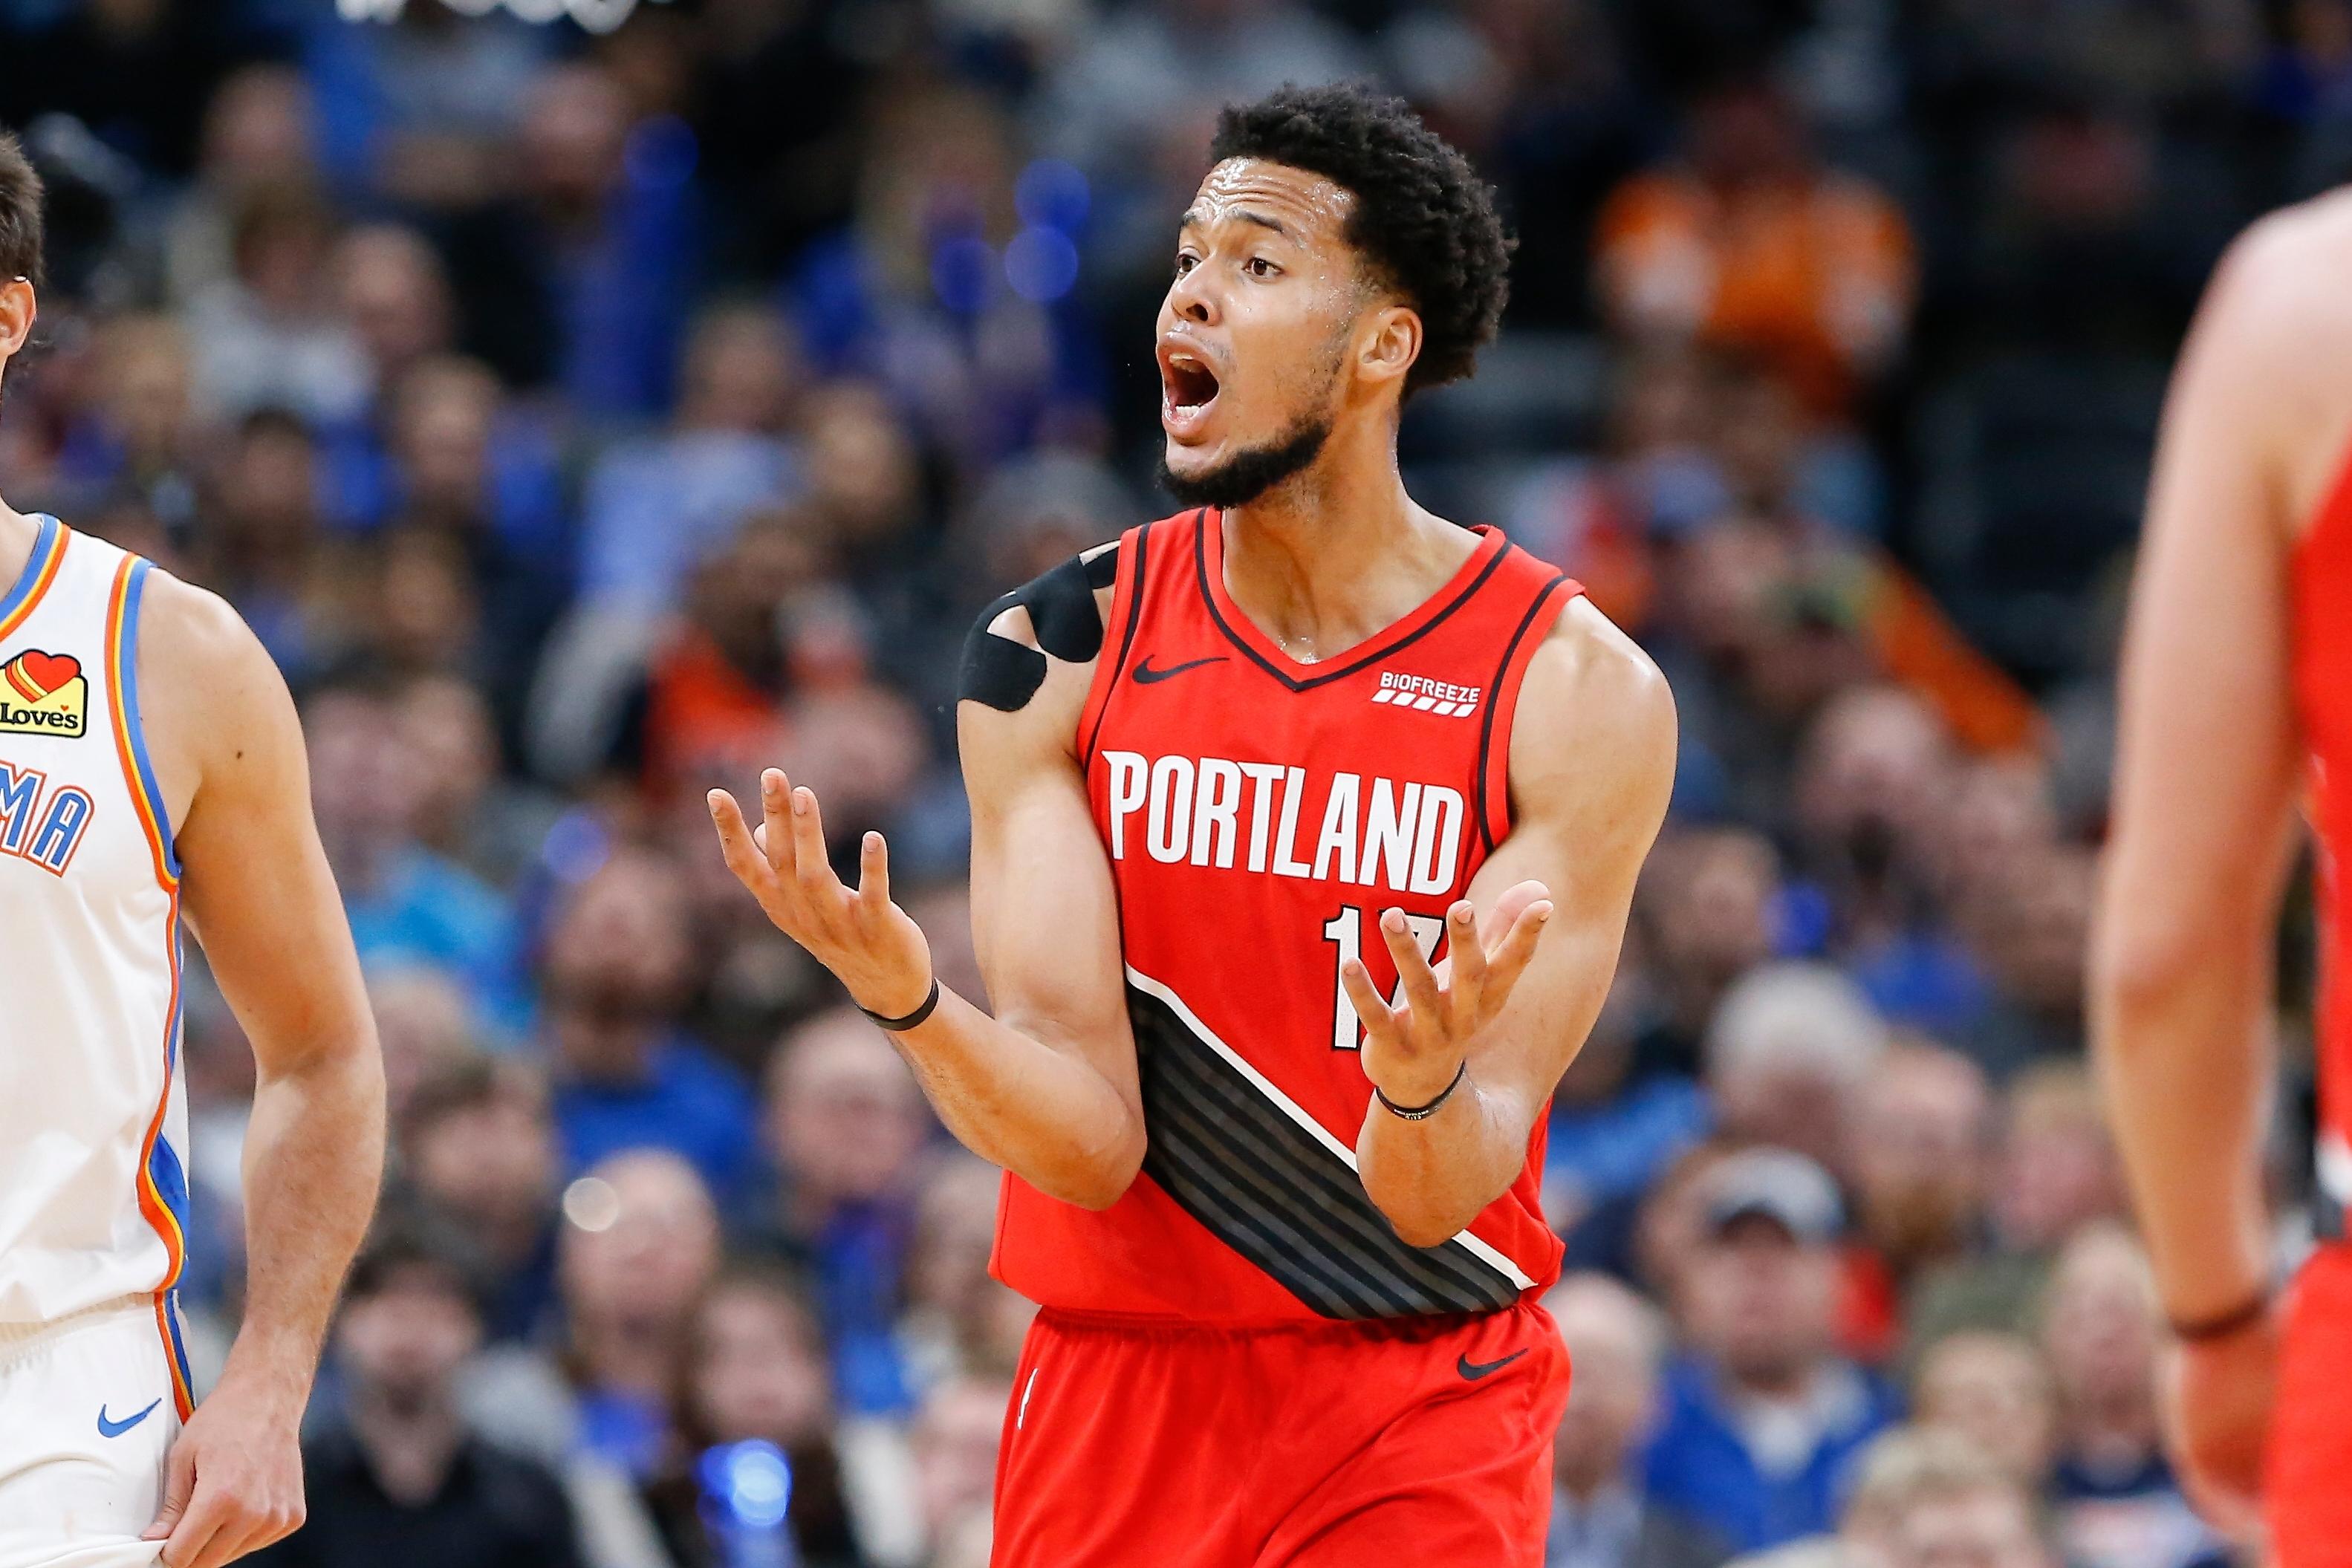 Oct 30, 2019; Oklahoma City, OK, USA; Portland Trail Blazers forward Skal Labissiere (17) reacts to a call against him after a play during the second quarter against the Oklahoma City Thunder at Chesapeake Energy Arena. / © Alonzo Adams-USA TODAY Sports